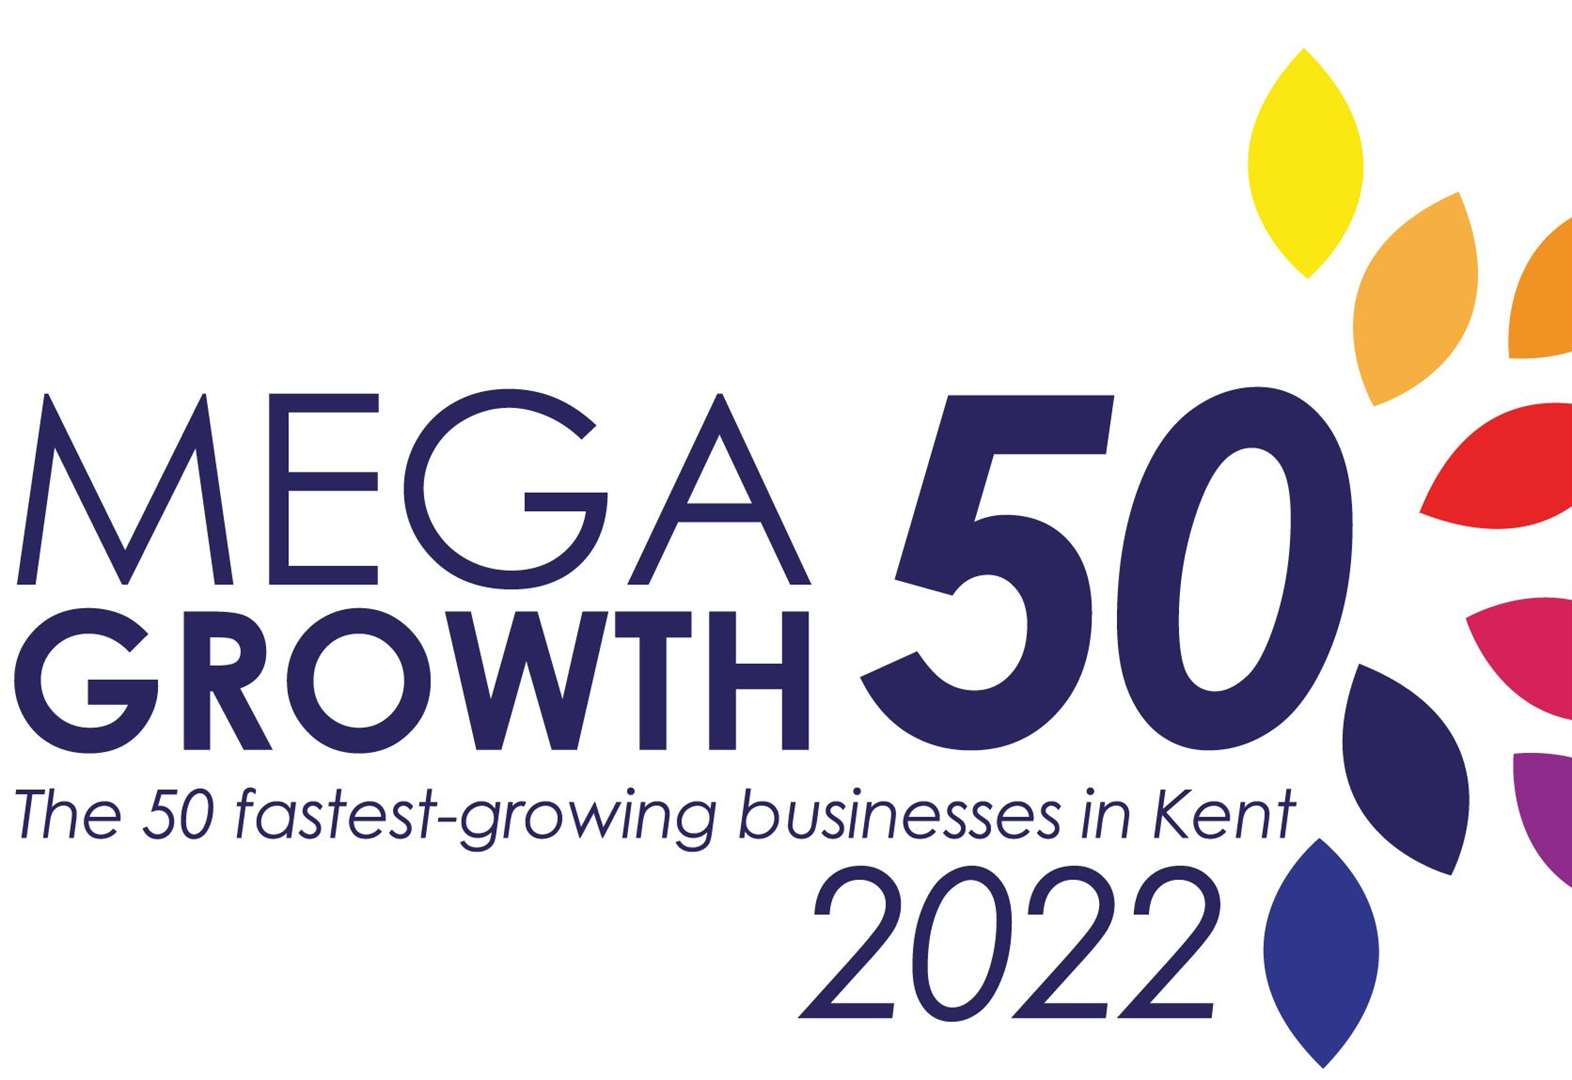 MegaGrowth 50 bounces back for 2022